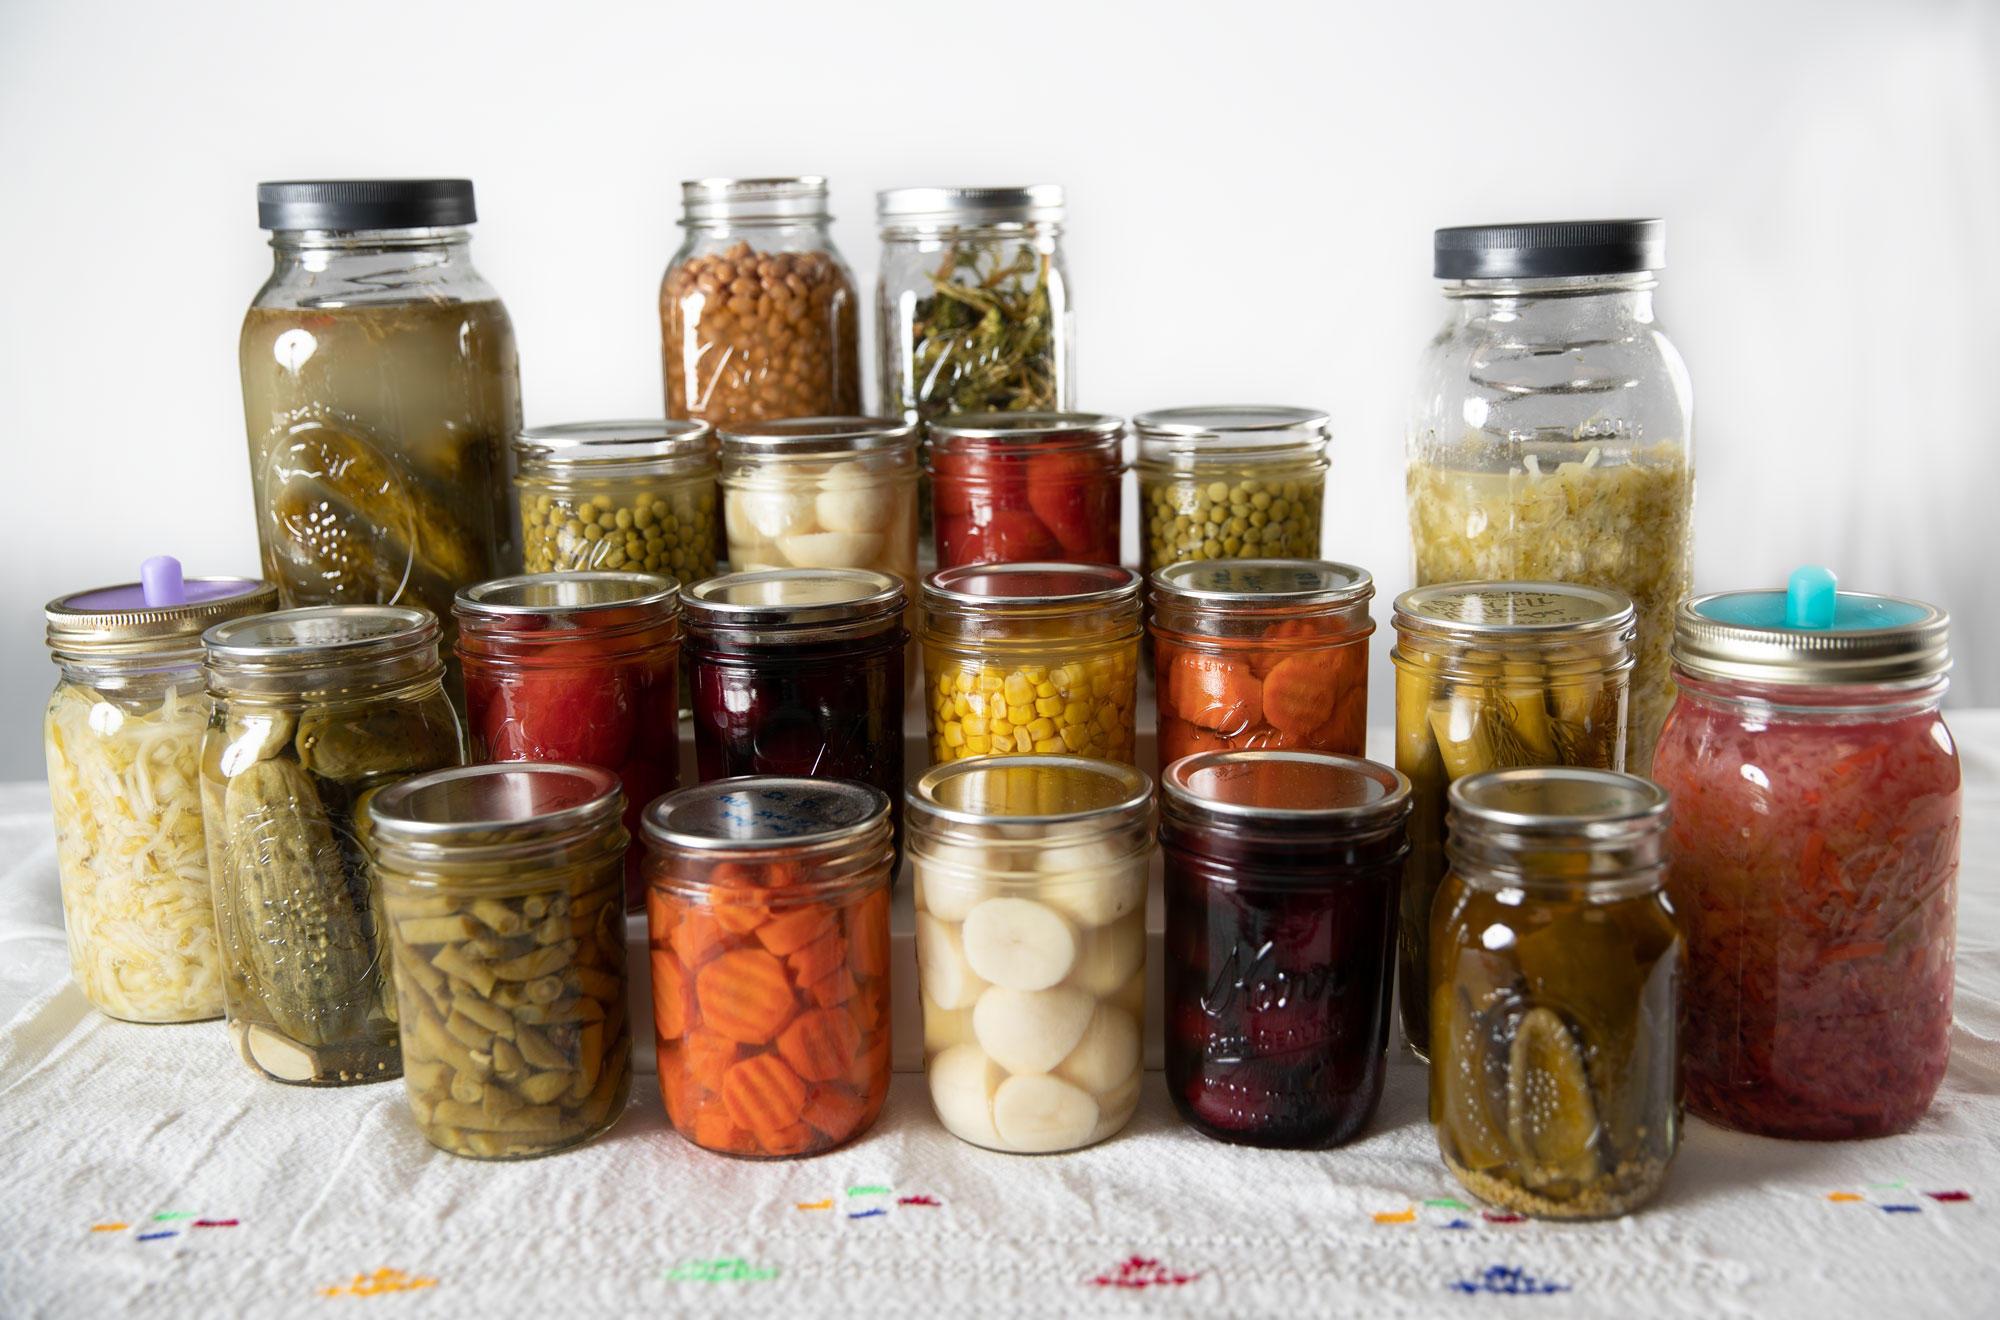 Canned vegetables displayed on a table with a white background.